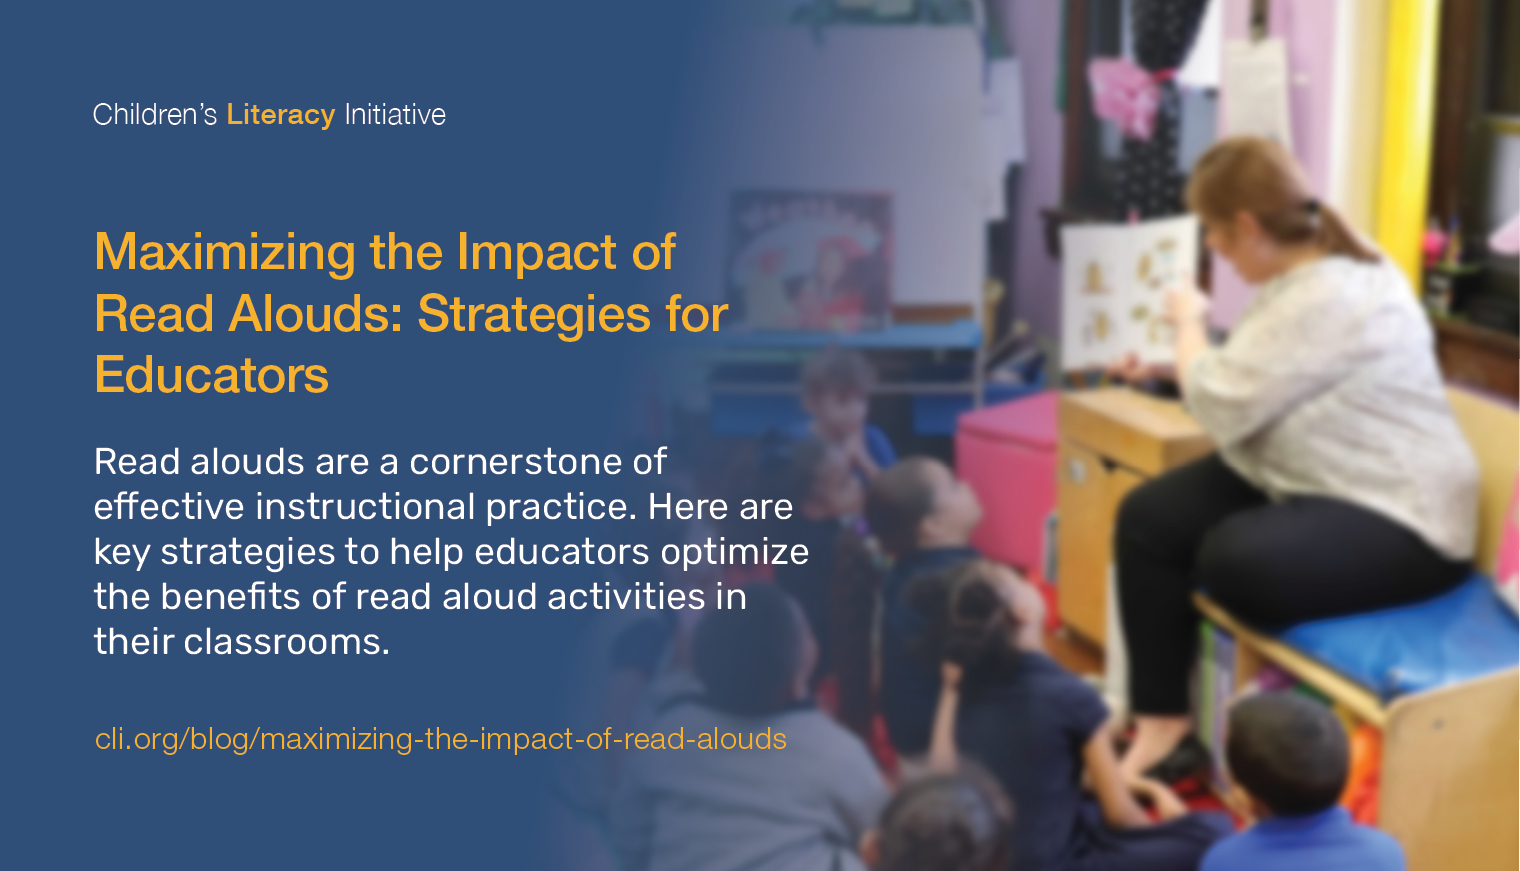 Featured image for “Maximizing the Impact of Read Alouds: Strategies for Educators”